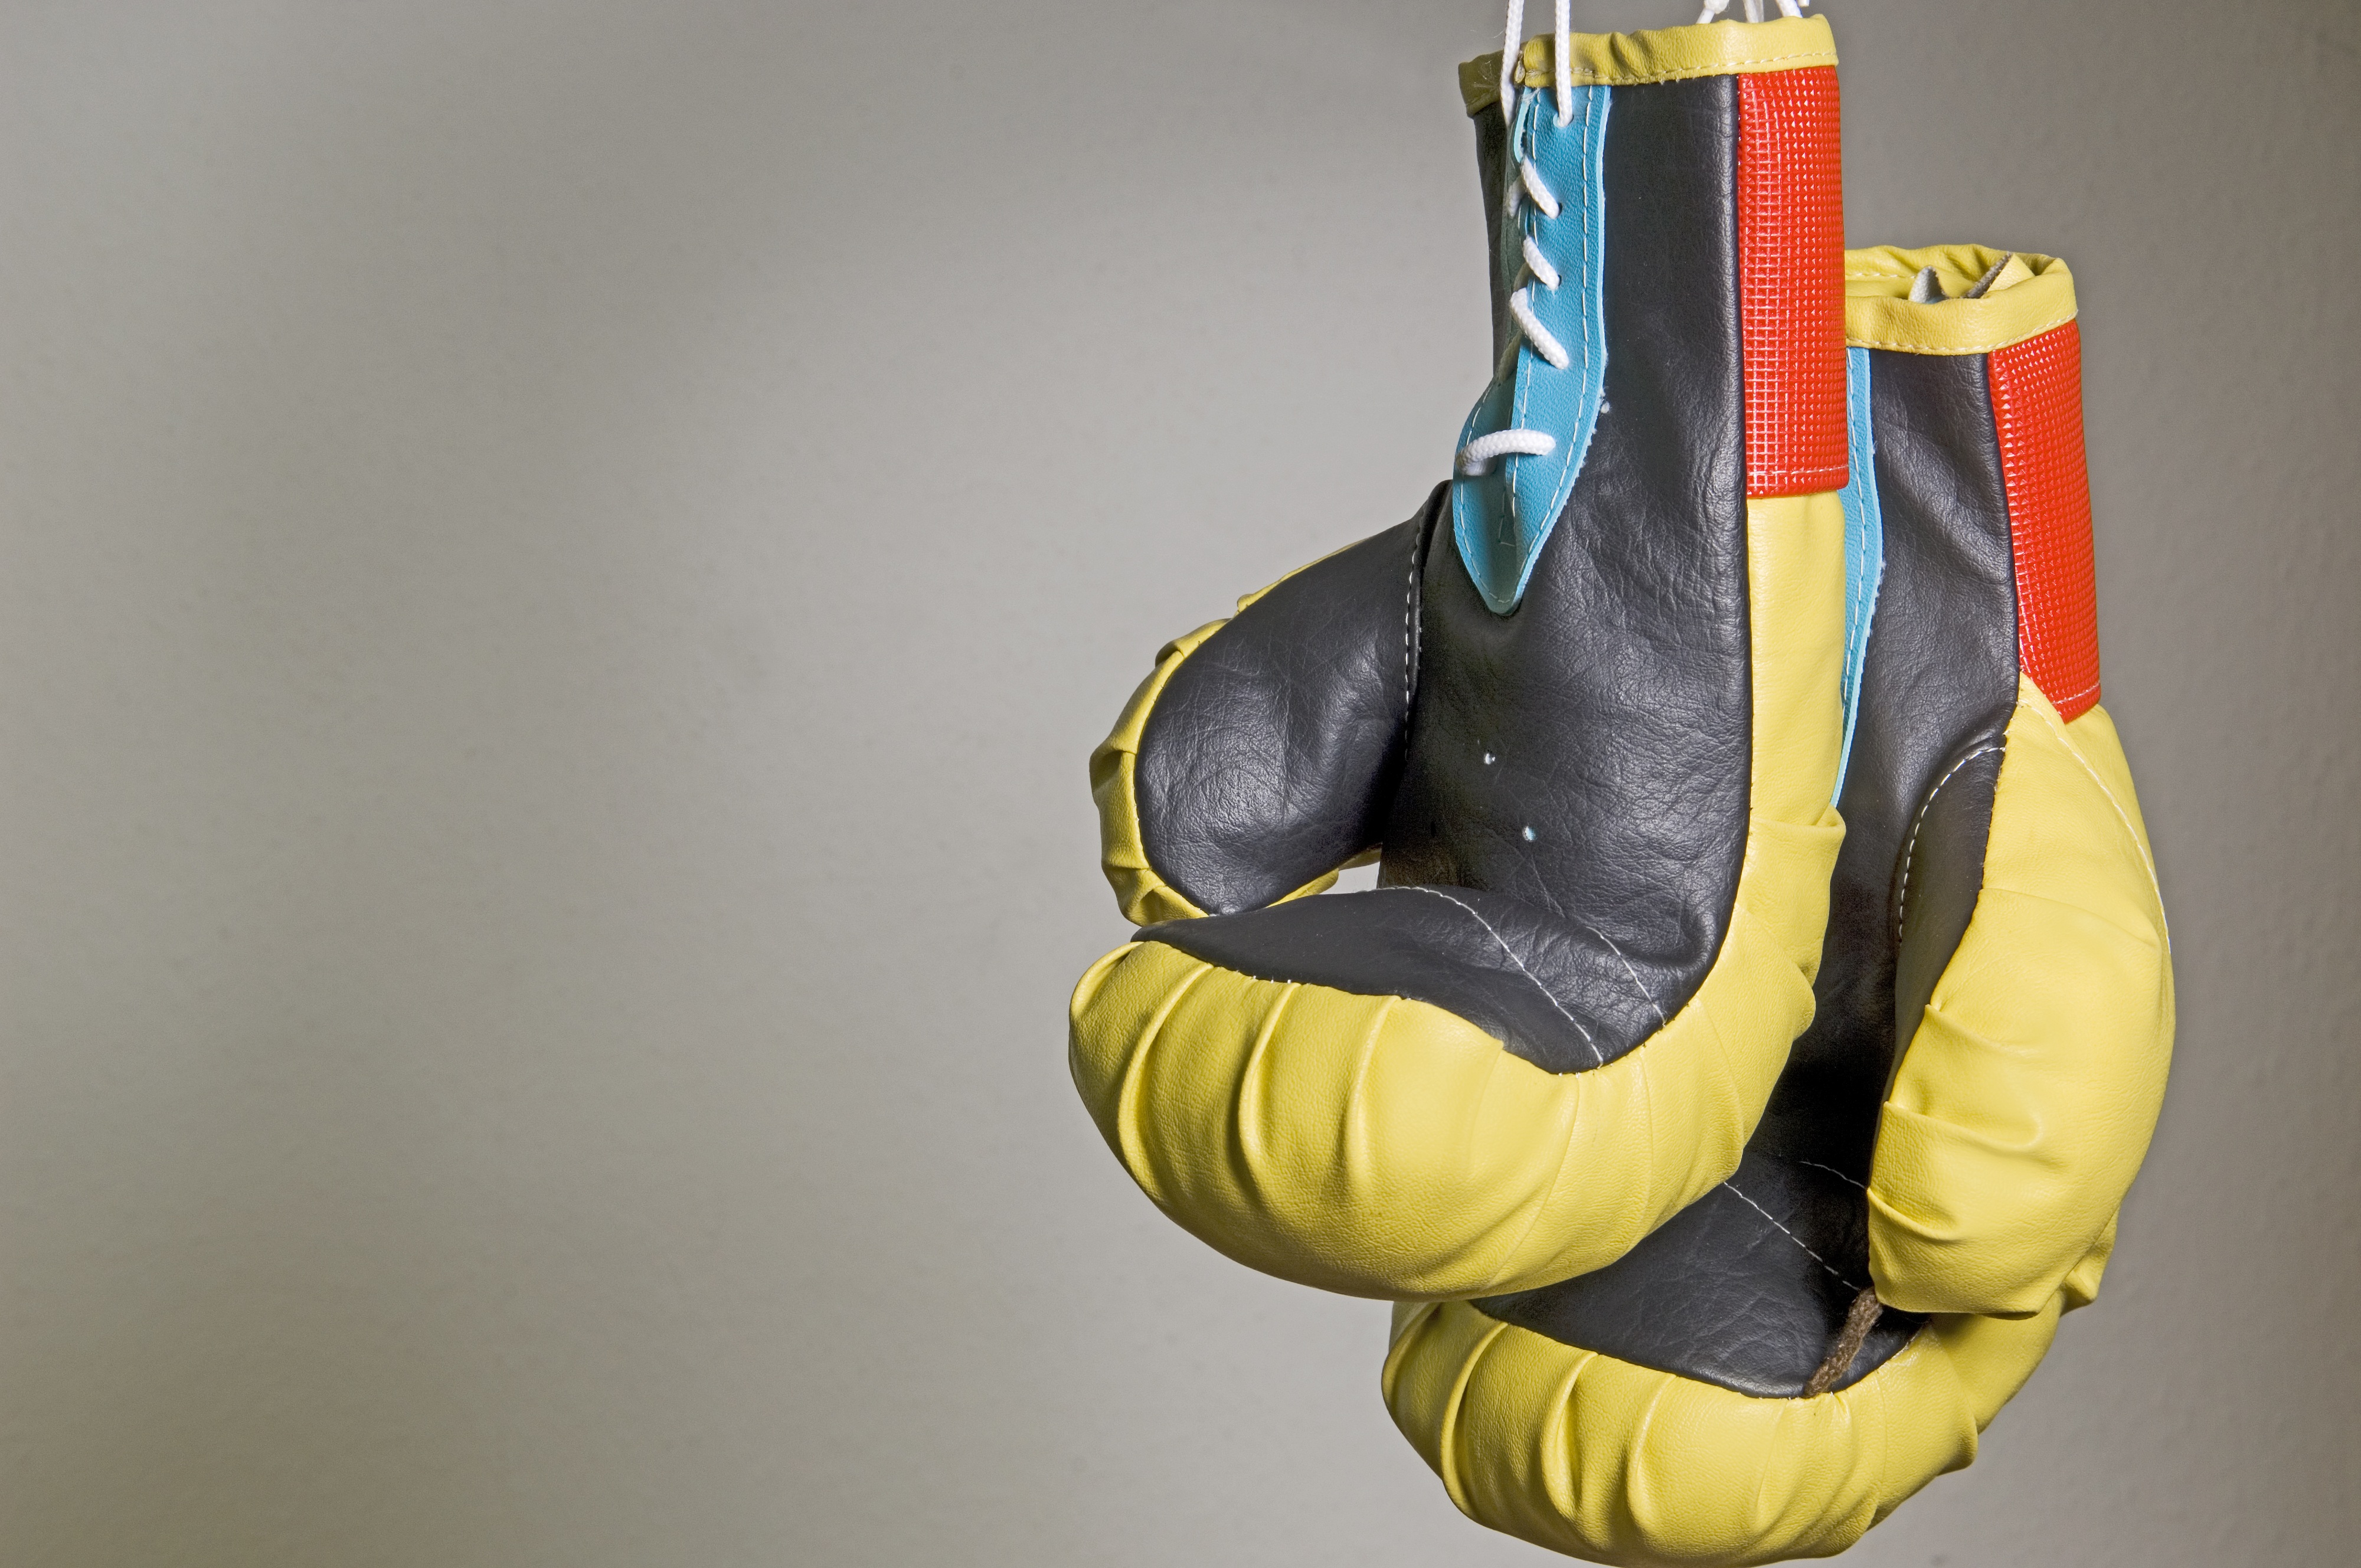 Photo of hanging boxing gloves by andreas160578